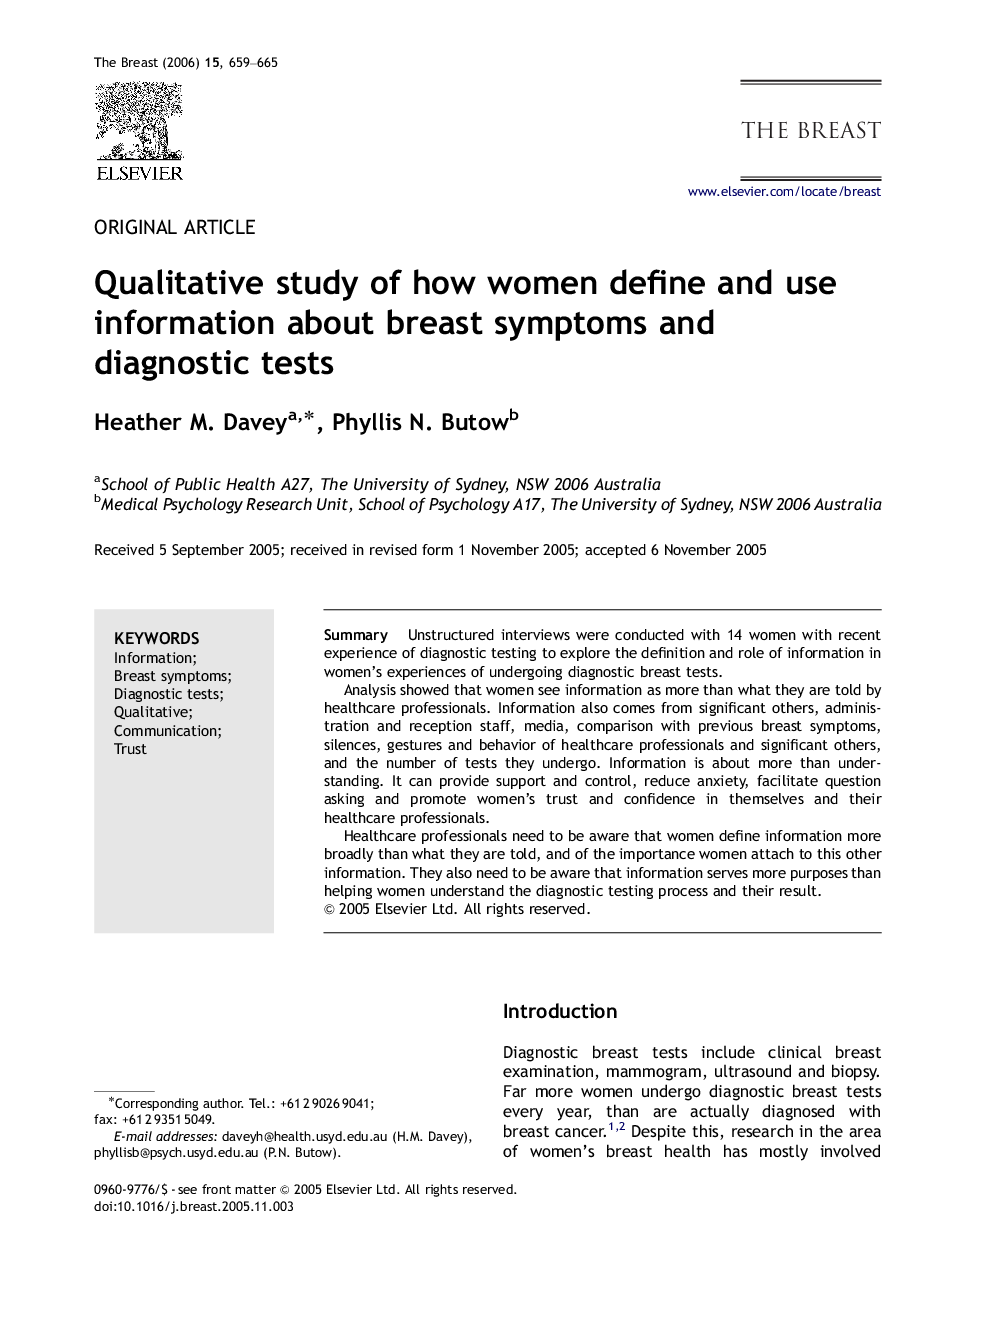 Qualitative study of how women define and use information about breast symptoms and diagnostic tests